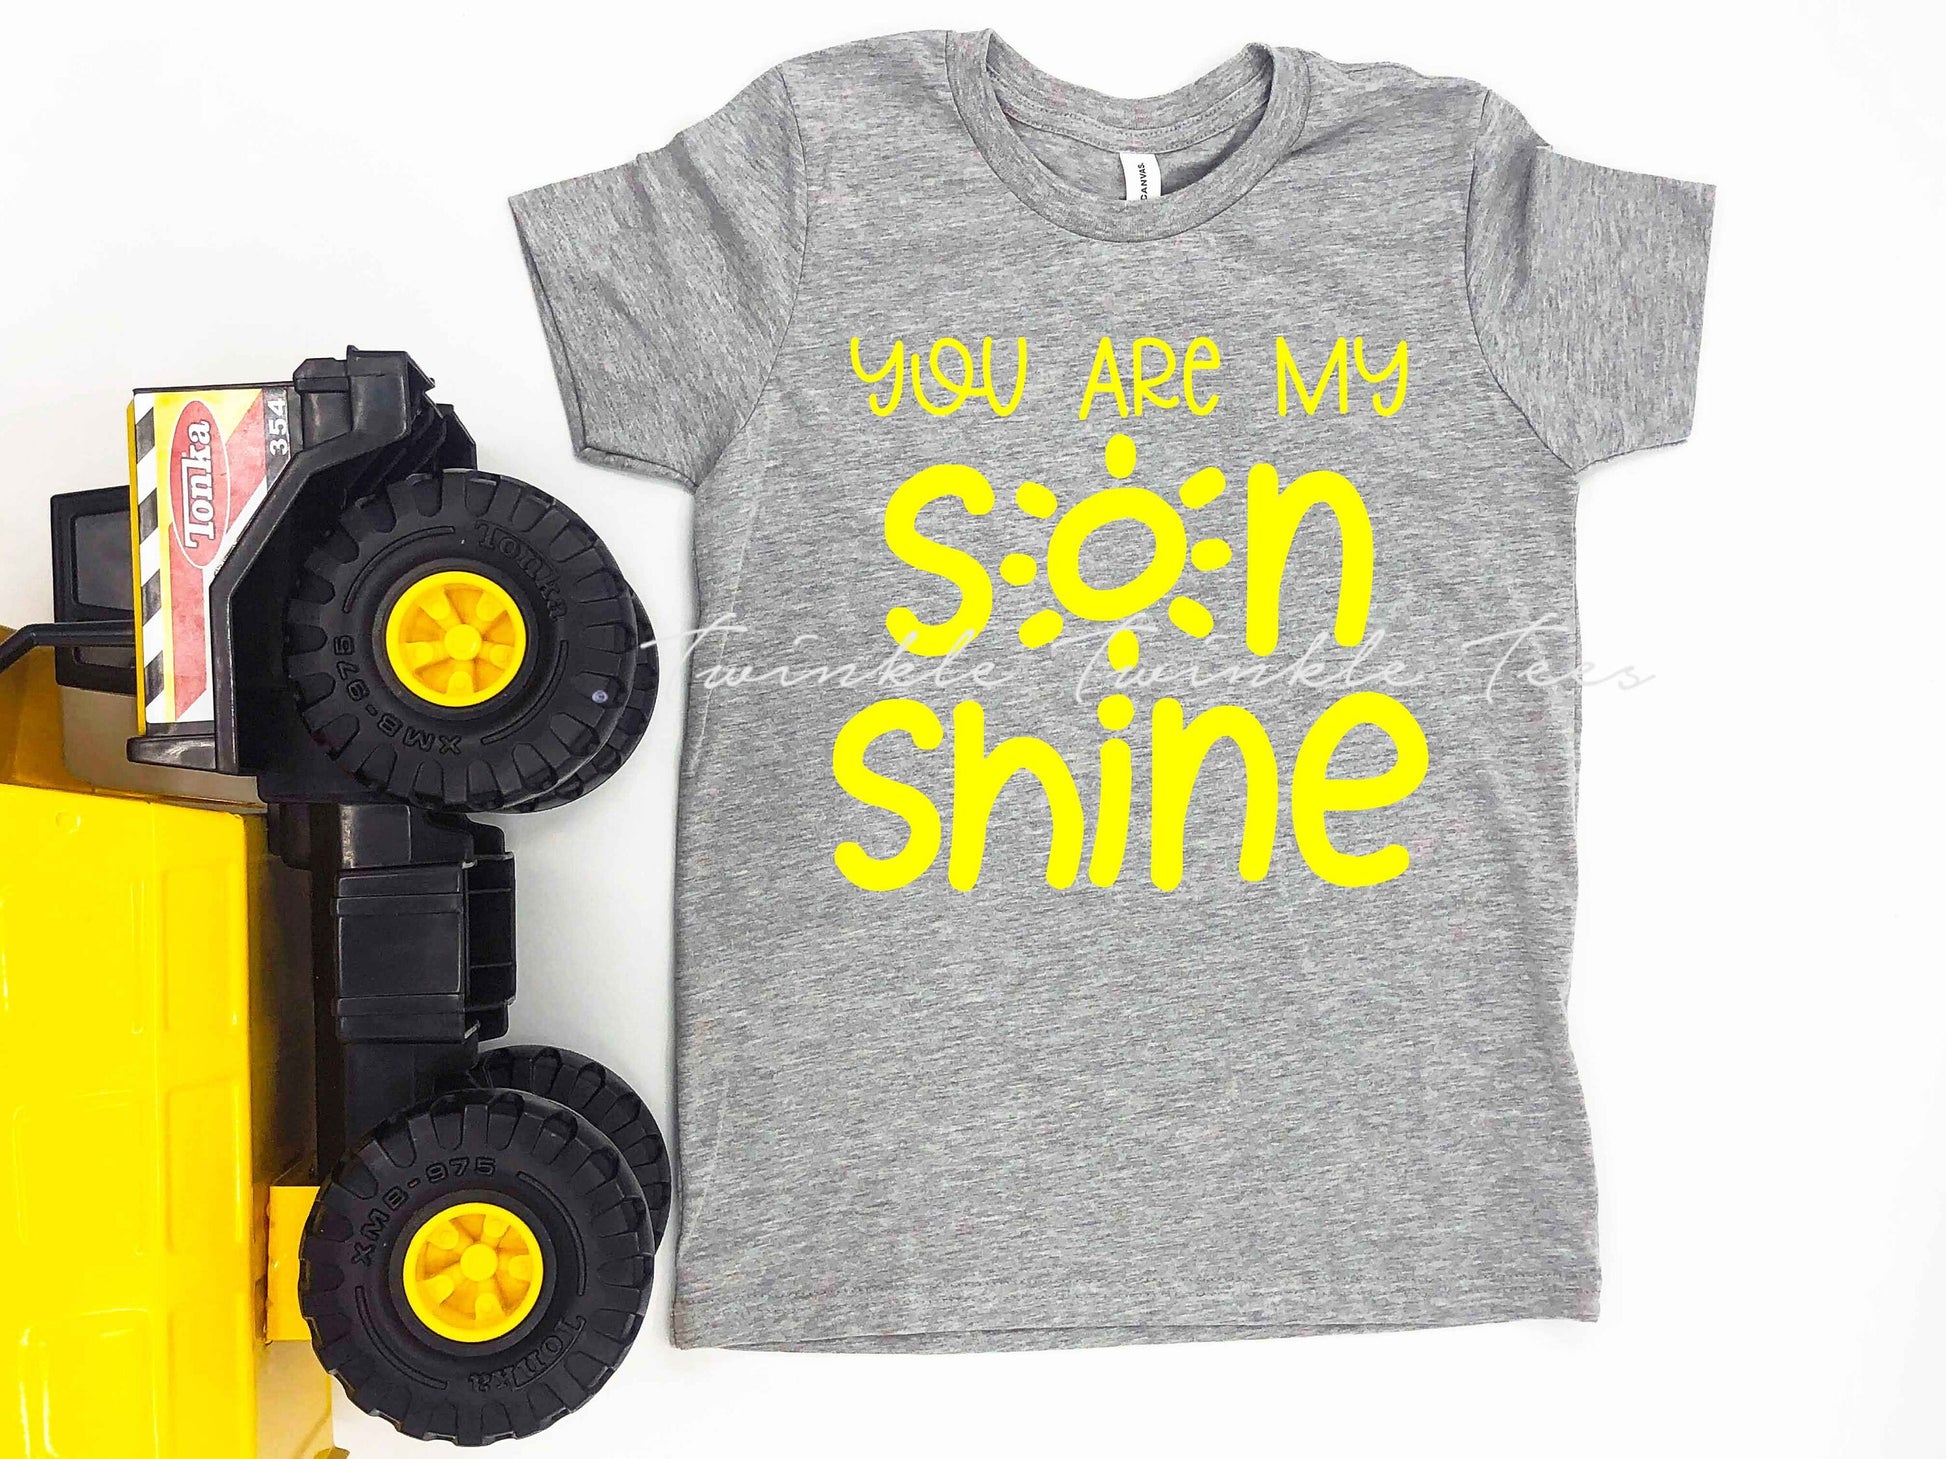 You are My SonShine Infant or Youth Shirt or Bodysuit - Baby Boy Shirt - My Son - Gift for Baby Boy - My Only Sunshine